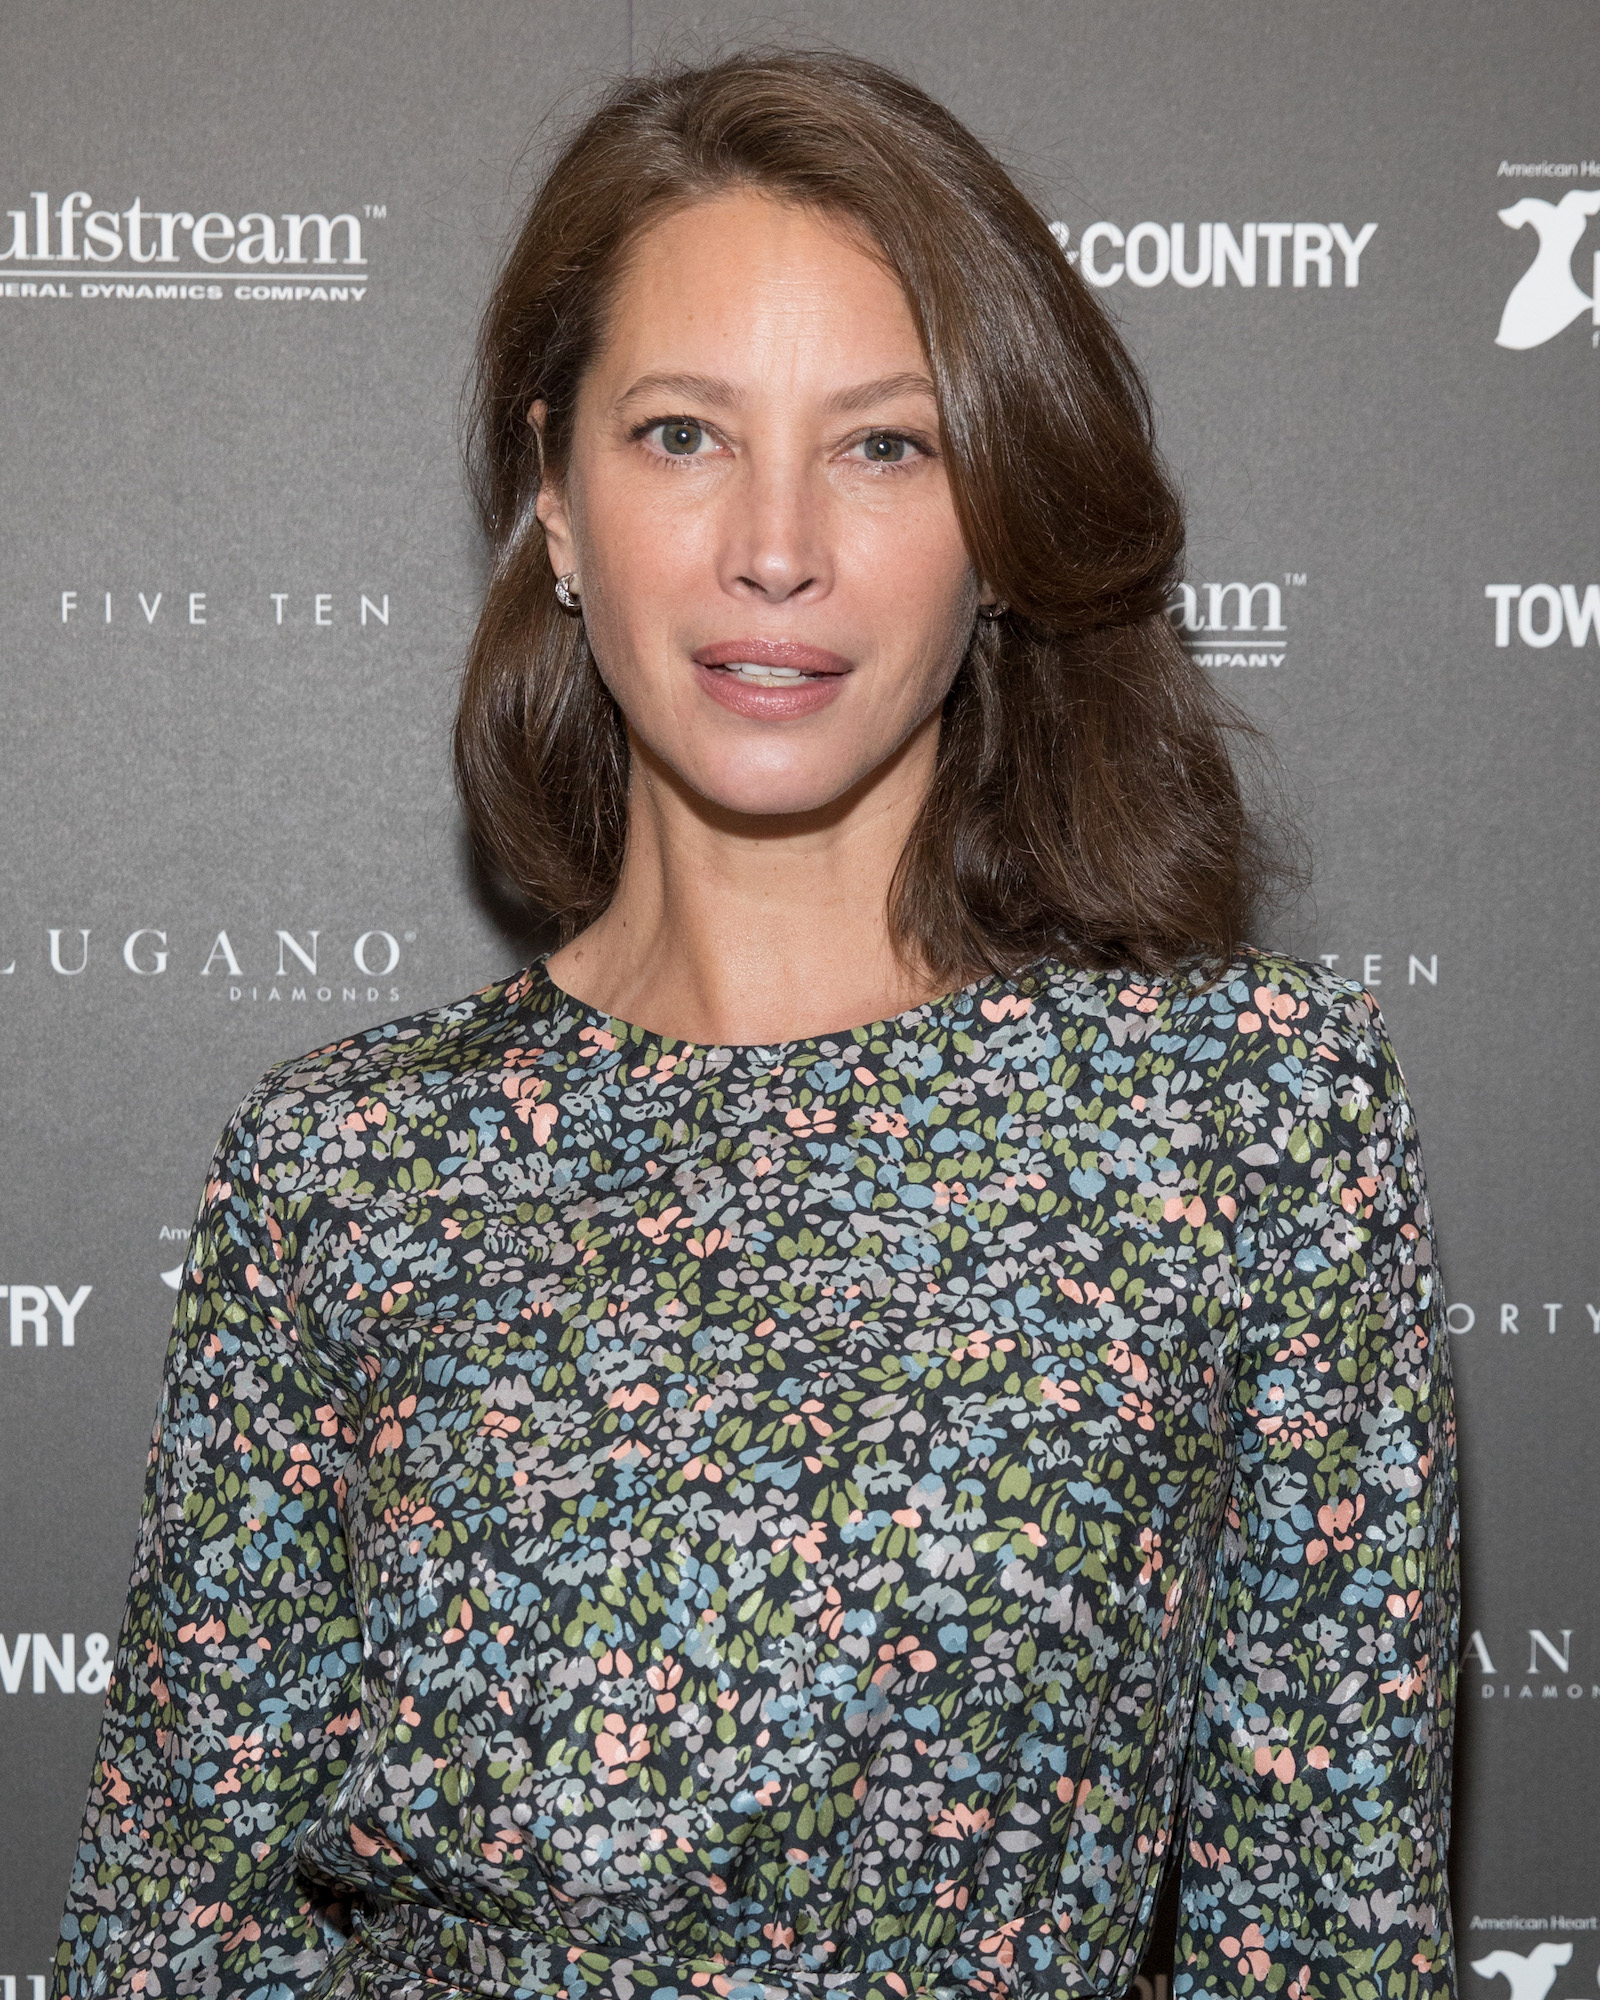 Christy Turlington Says Son's Basketball Opponents Shared Her Nude Photo